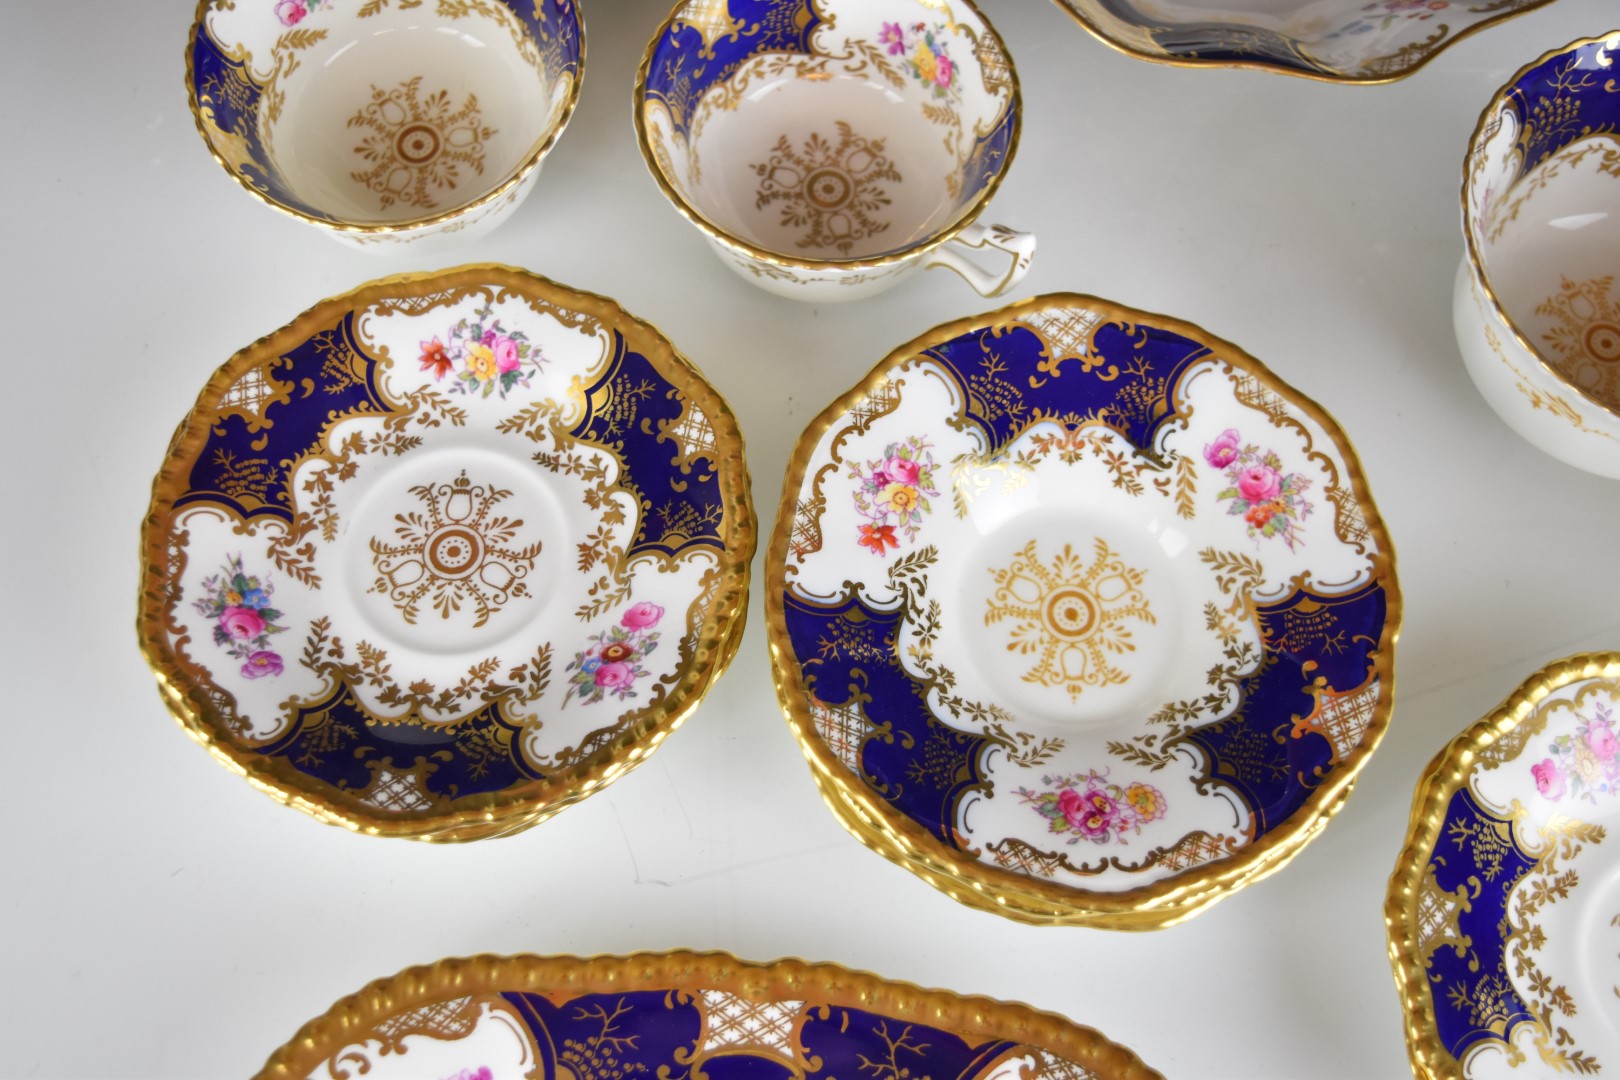 Coalport tea ware decorated in the Batwing pattern, approximately 27 pieces - Image 11 of 18